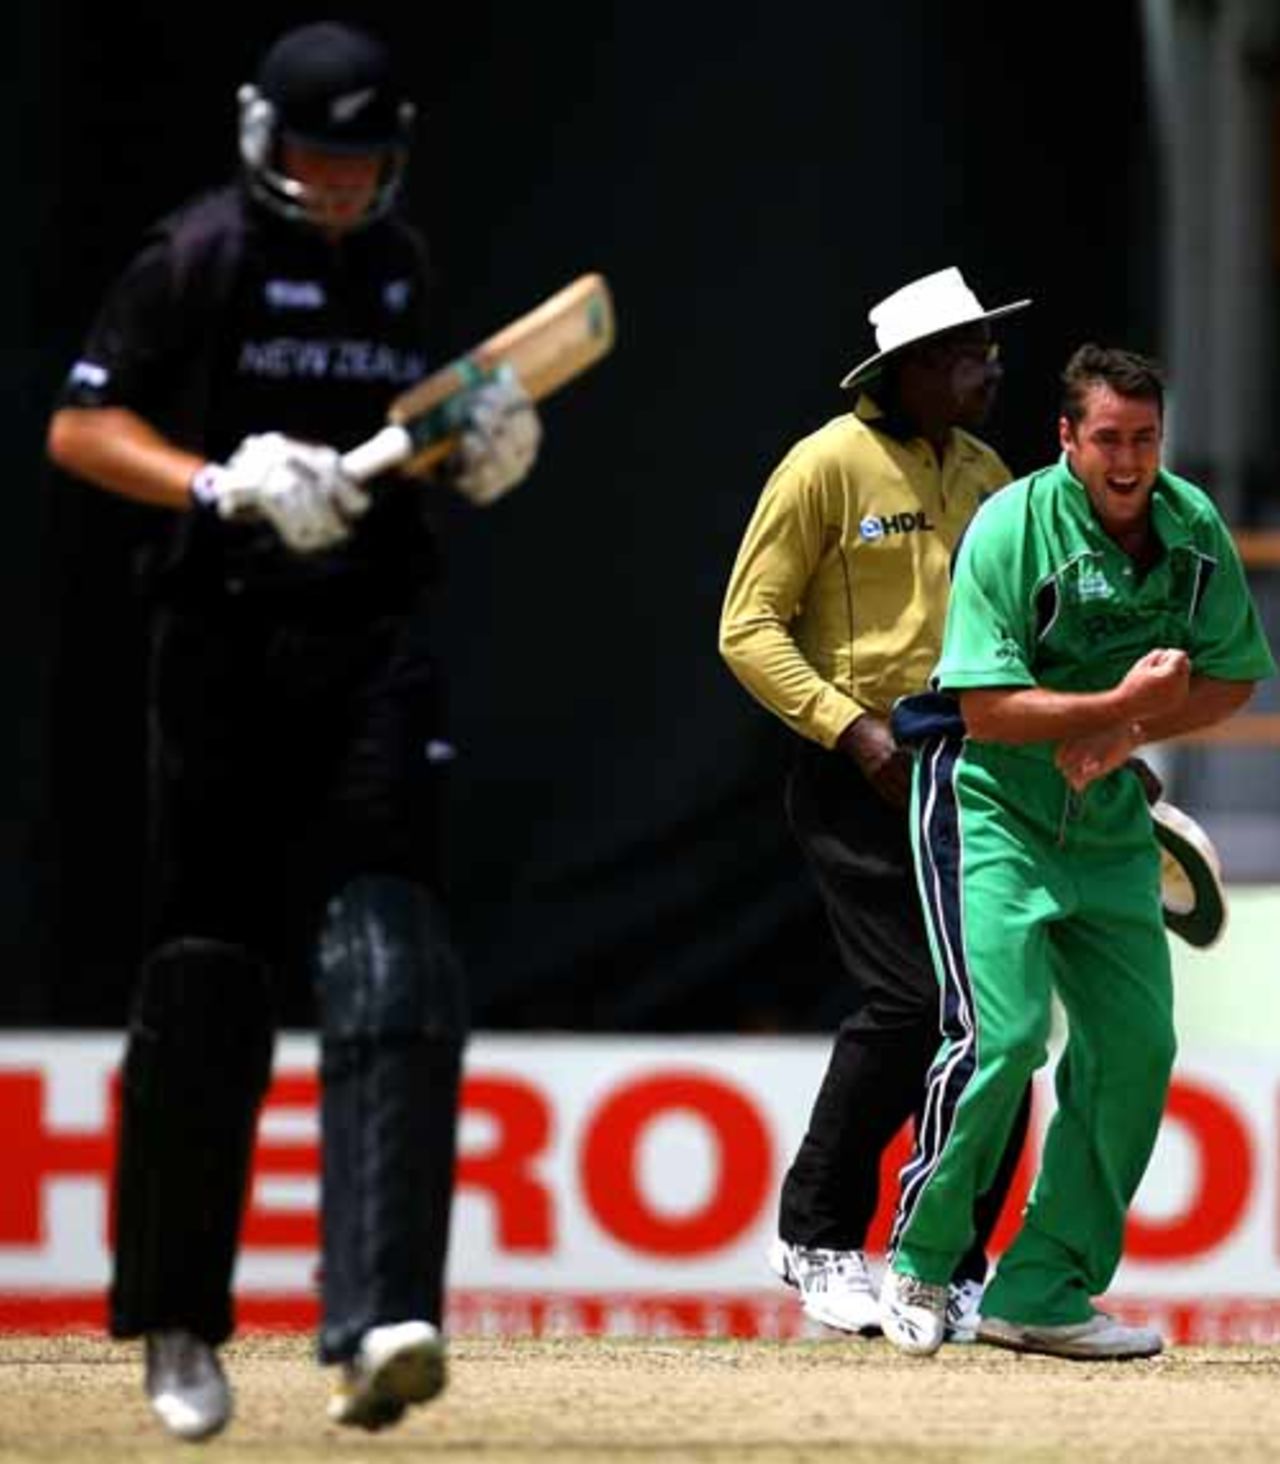 Dave Langford-Smith does a chicken dance after getting Hamish Marshall out, Ireland v New Zealand, Super Eights, Guyana, April 9, 2007 